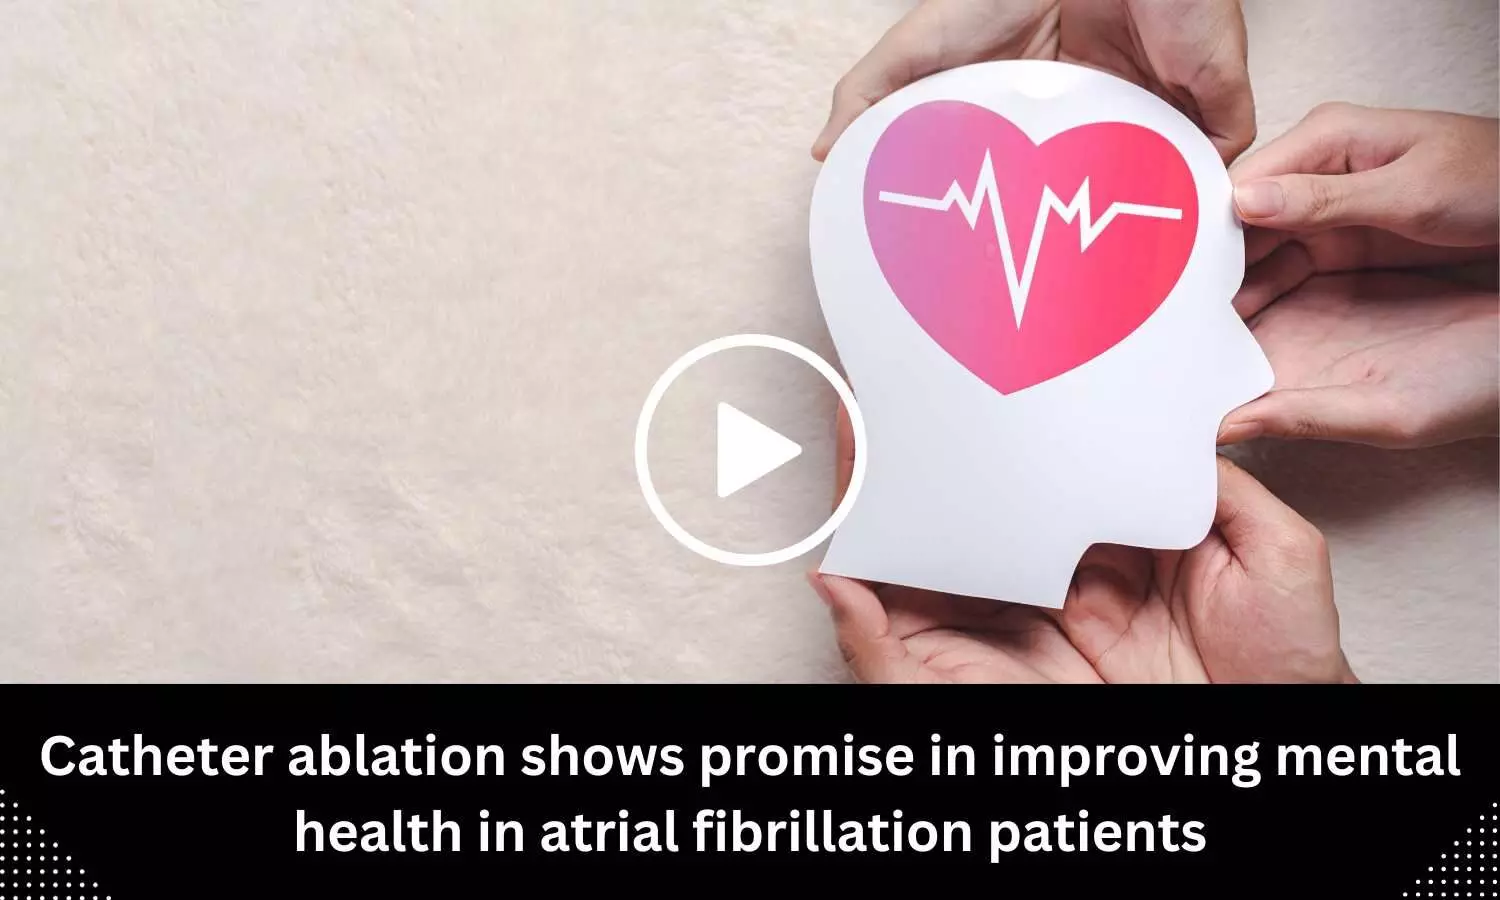 Catheter ablation shows promise in improving mental health in atrial fibrillation patients